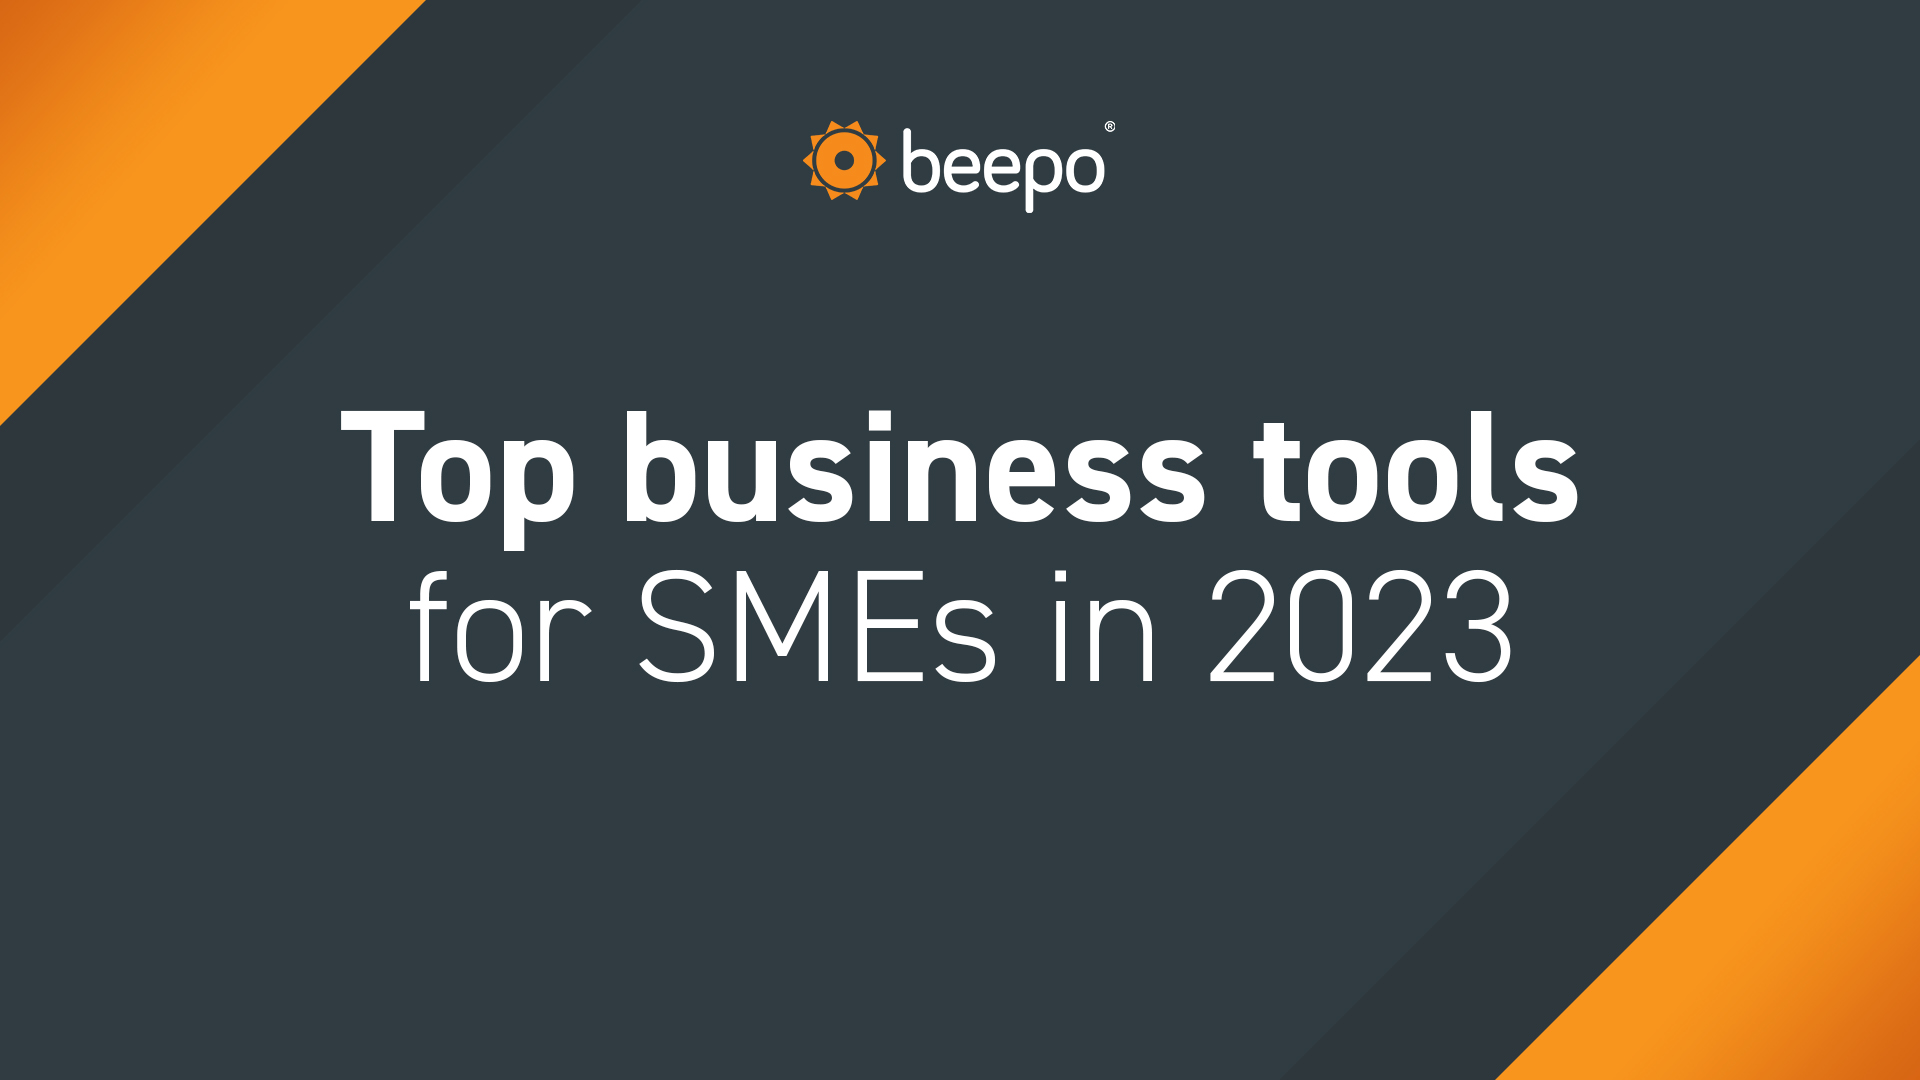 The top business tools for SMEs this year